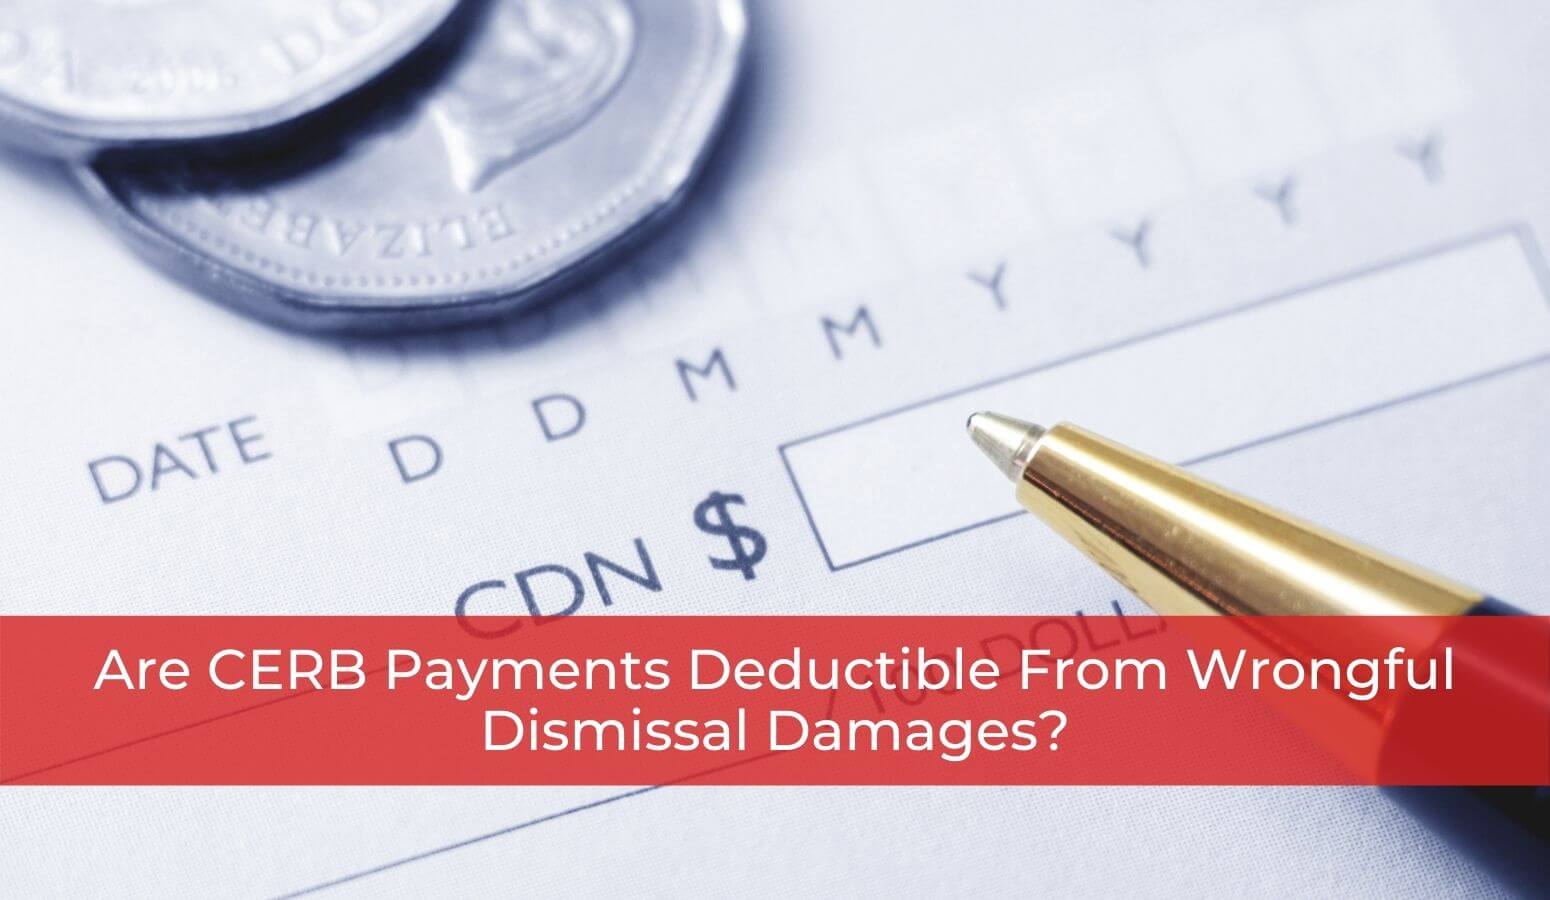 Featured image for “Are CERB Payments Deductible From Wrongful Dismissal Damages?”